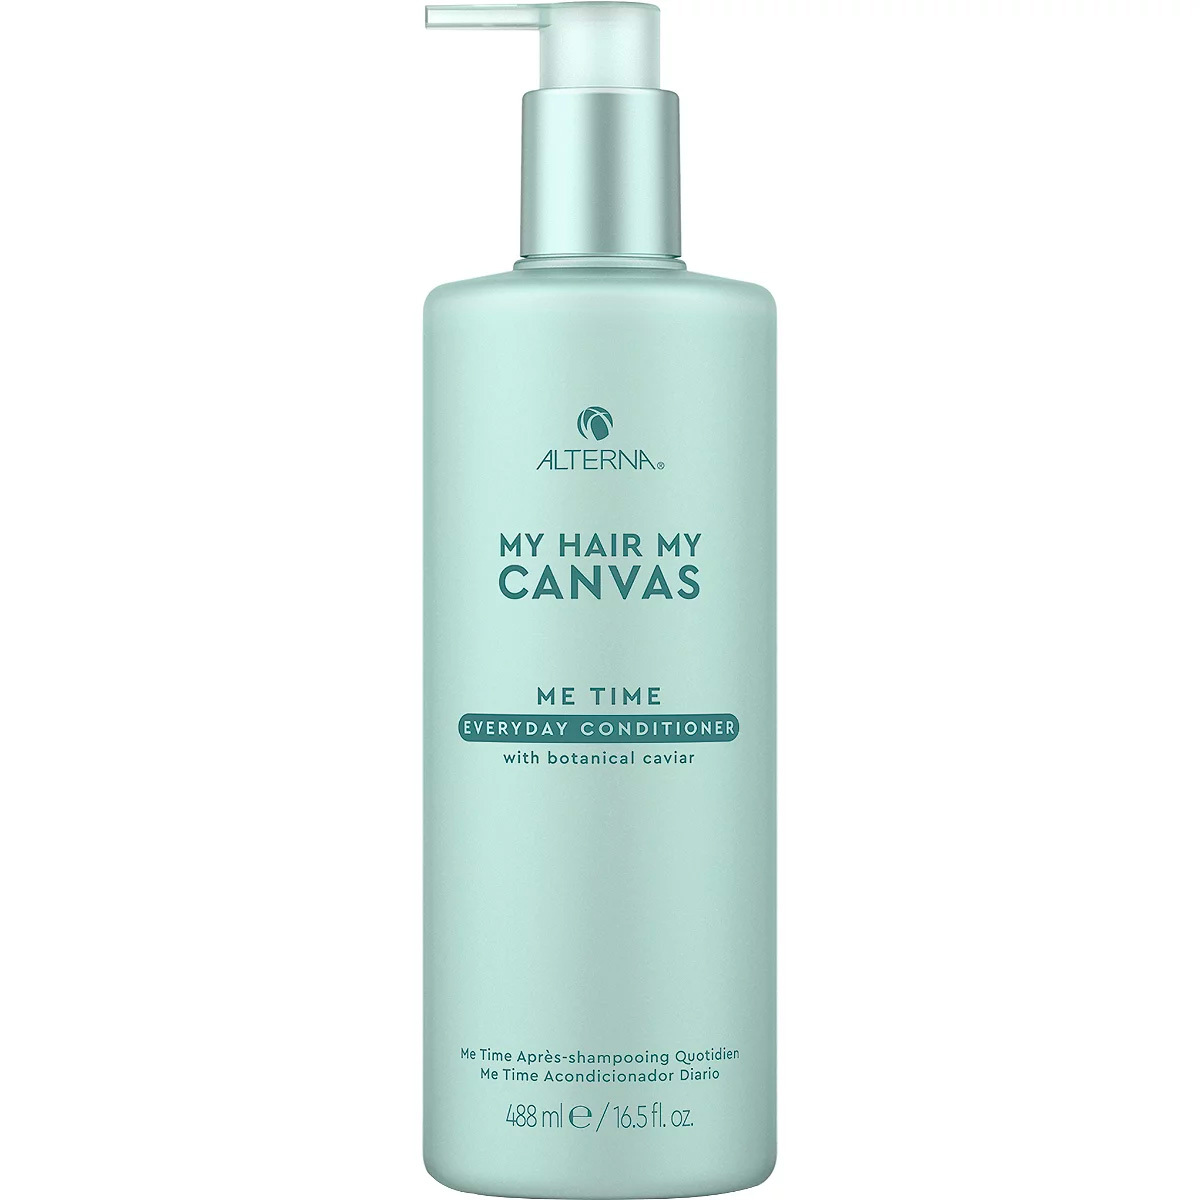 Alterna My Hair. My Canvas. ME TIME Everyday Conditioner 16.5oz